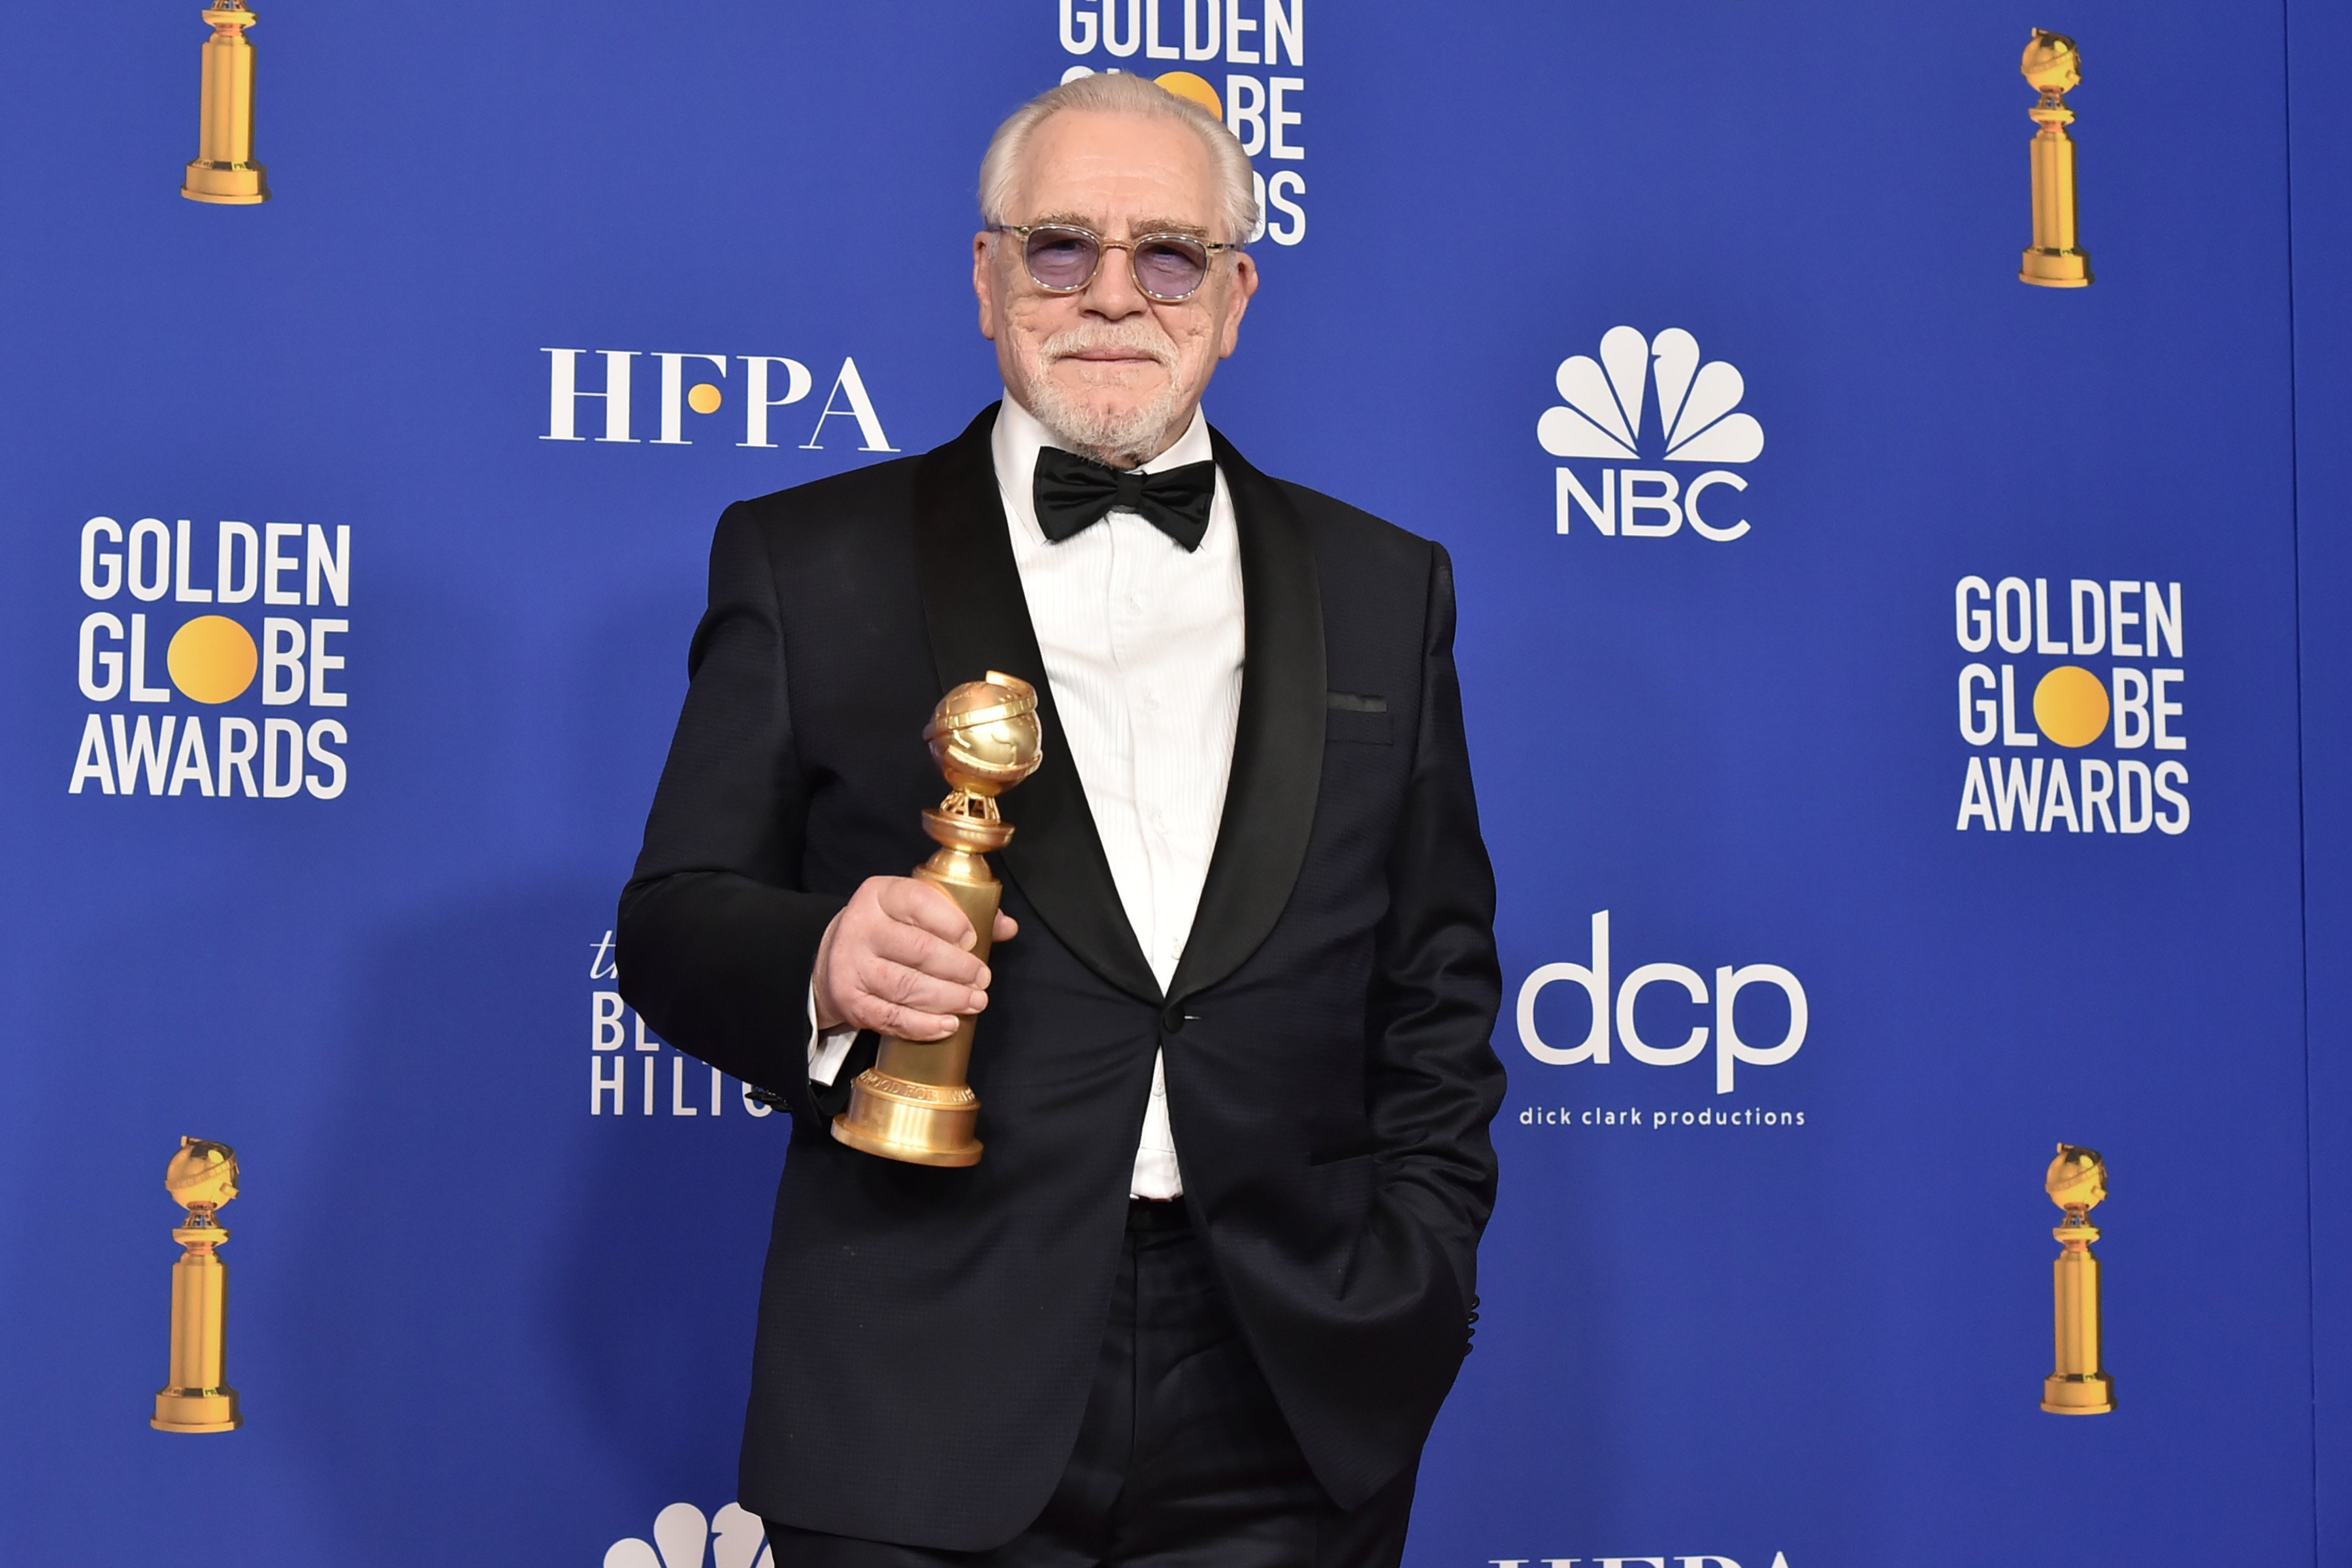 Succession Season 3 actor Brian Cox in a suit and sunglasses at the Golden Globes.